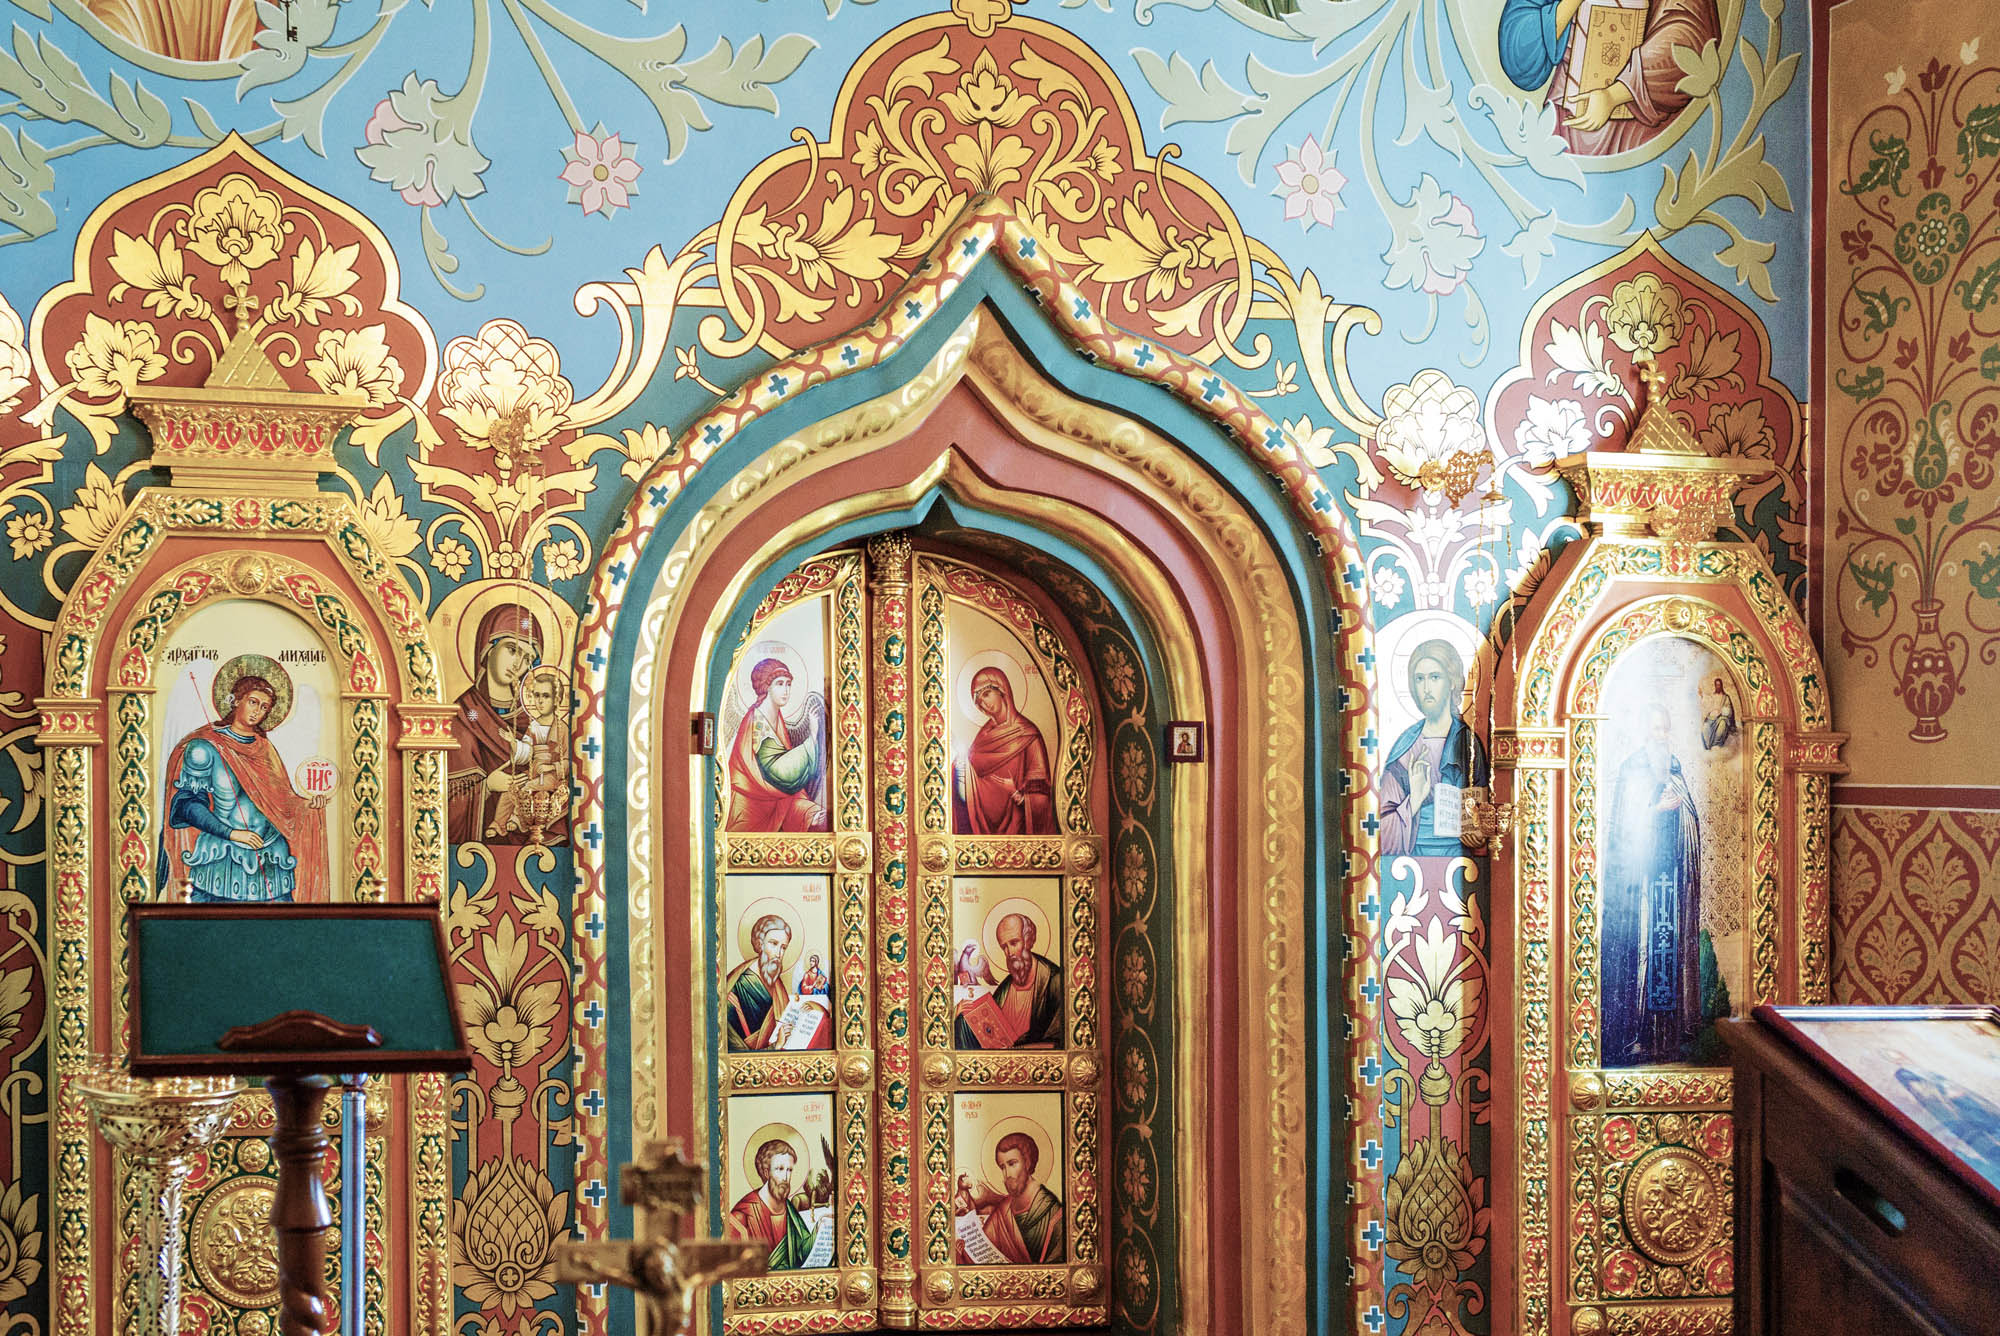 Magnificently decorated interiors of the Ipatievsky Monastery in Kostroma